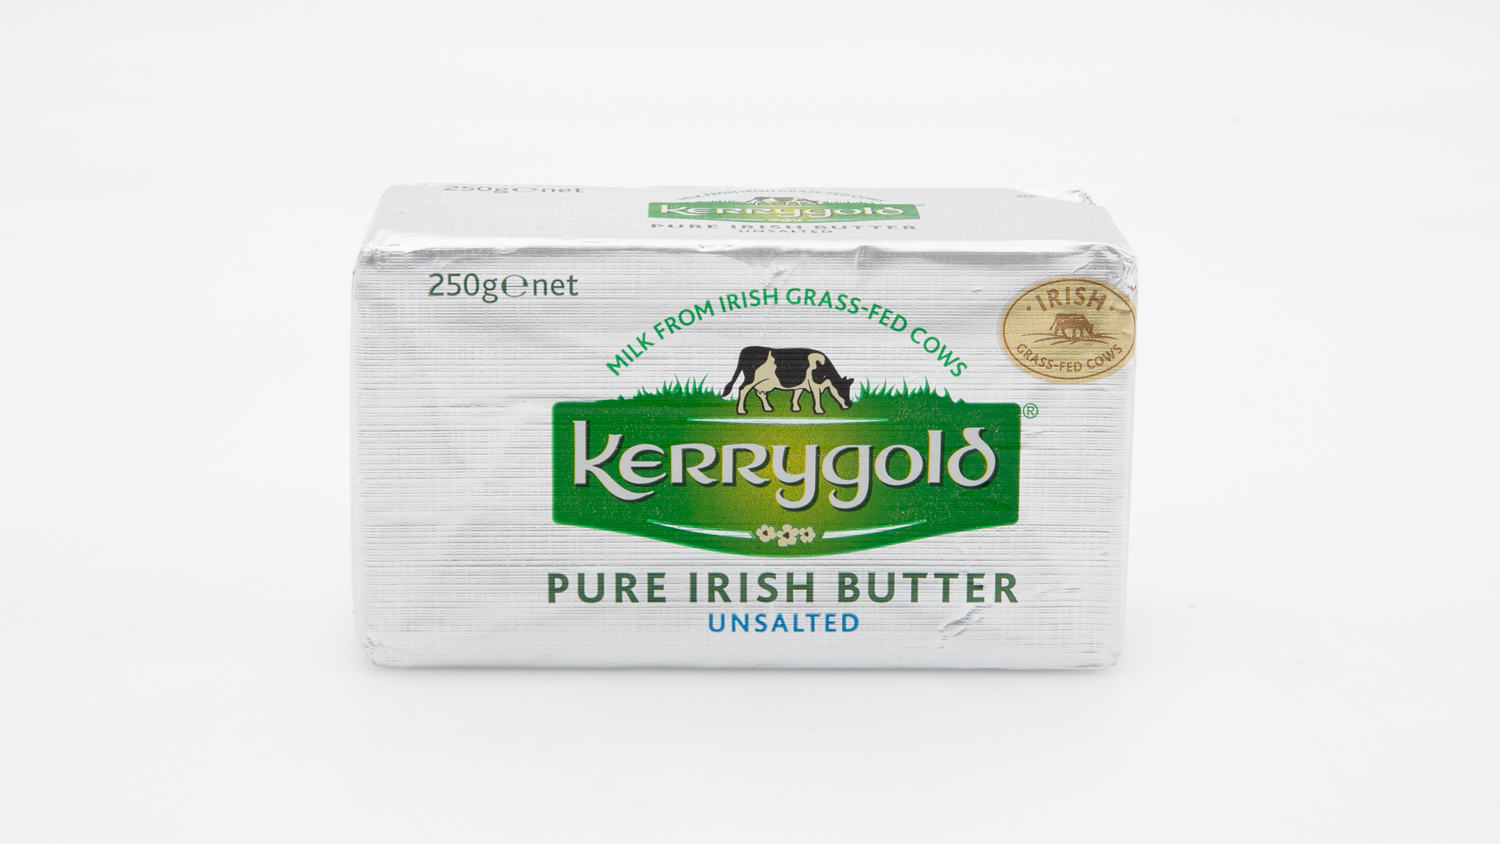 Kerrygold launches Irish butter with olive oil